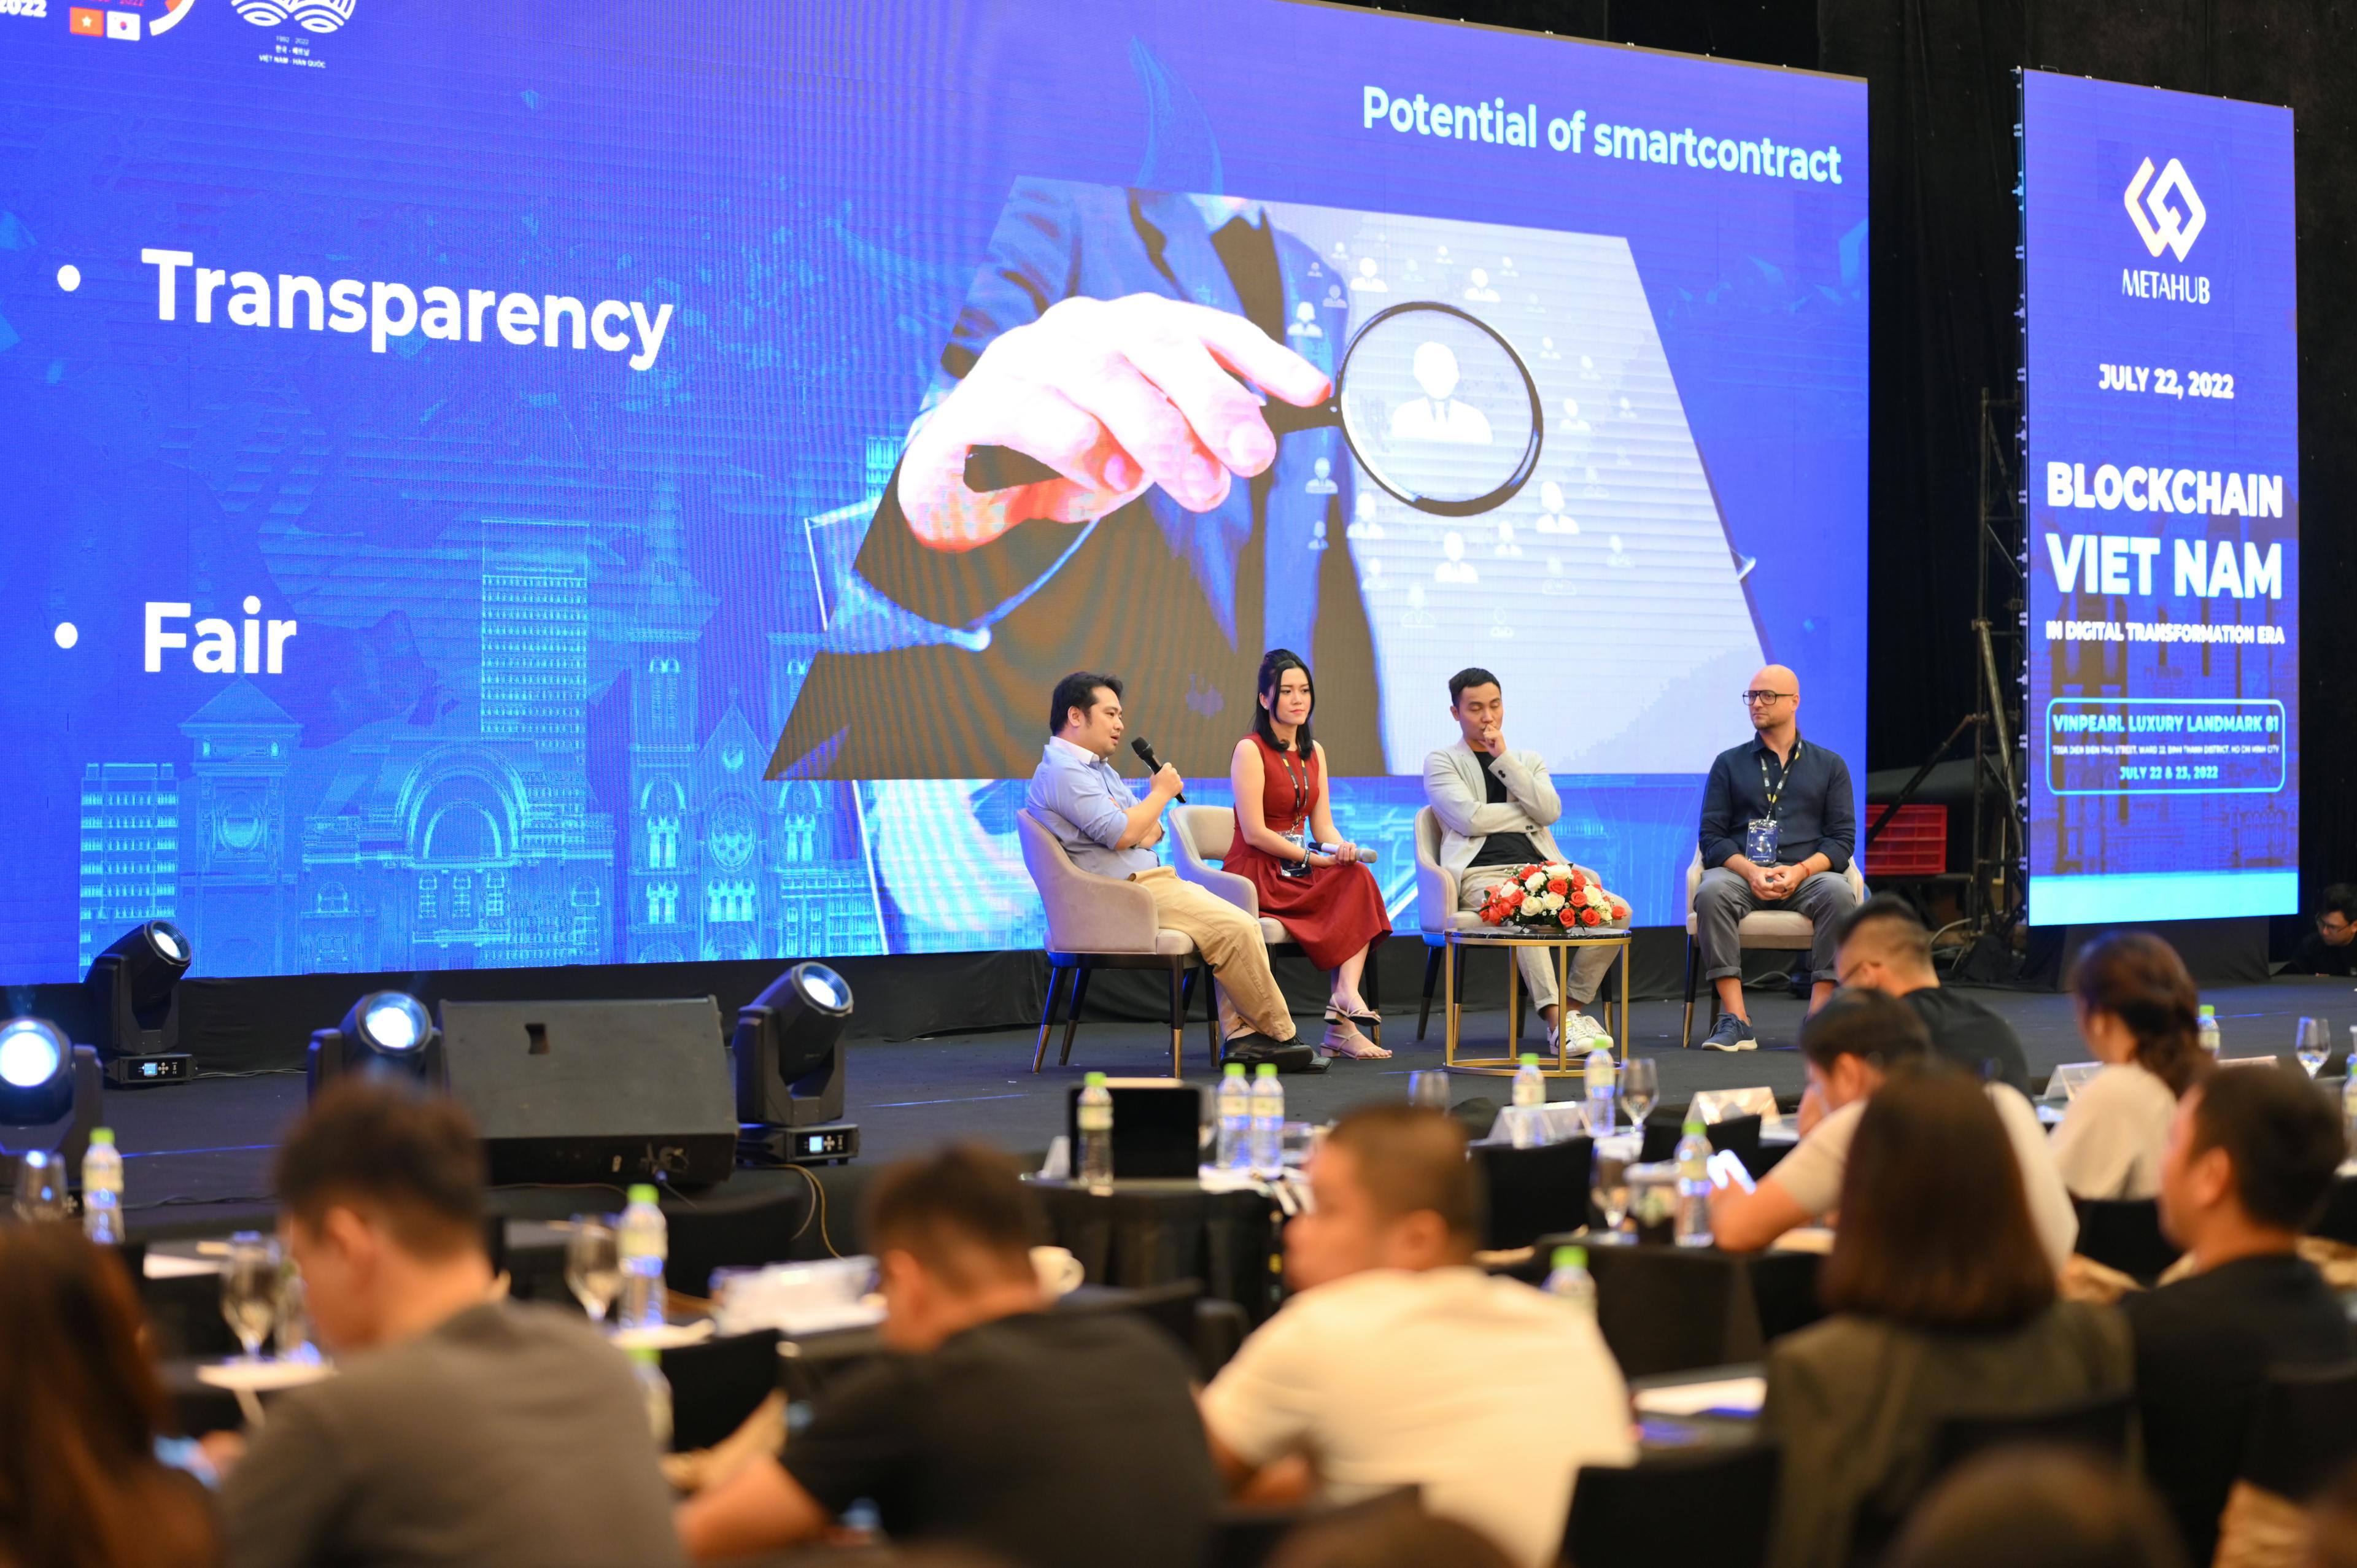 CMO of Fantom Foundation Simone Pomposi (1st from the right) sharing thoughts on the potential of the smart contracts.